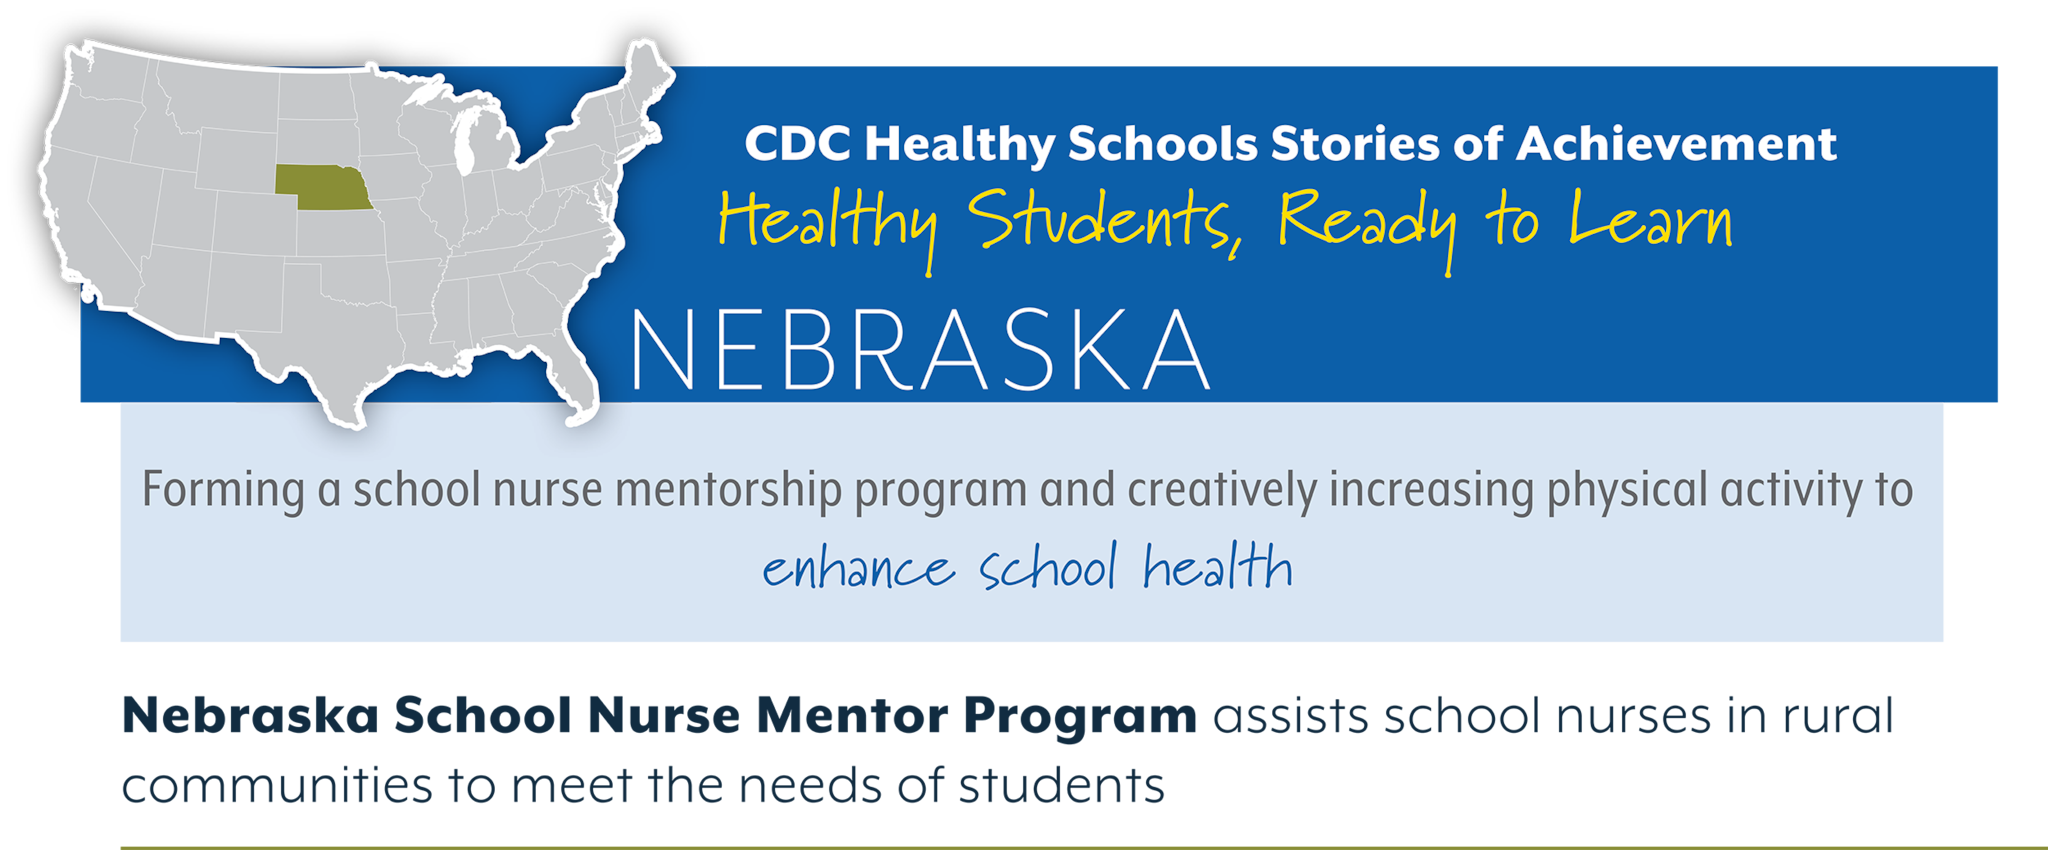 CDC Healthy Schools Stories of Achievement  Healthy Students, Ready to Learn  NEBRASKA Forming a school nurse mentorship program and creatively increasing physical activity to  enhance school health  Nebraska School Nurse Mentor Program assists school nurses in rural  communities to meet the needs of students